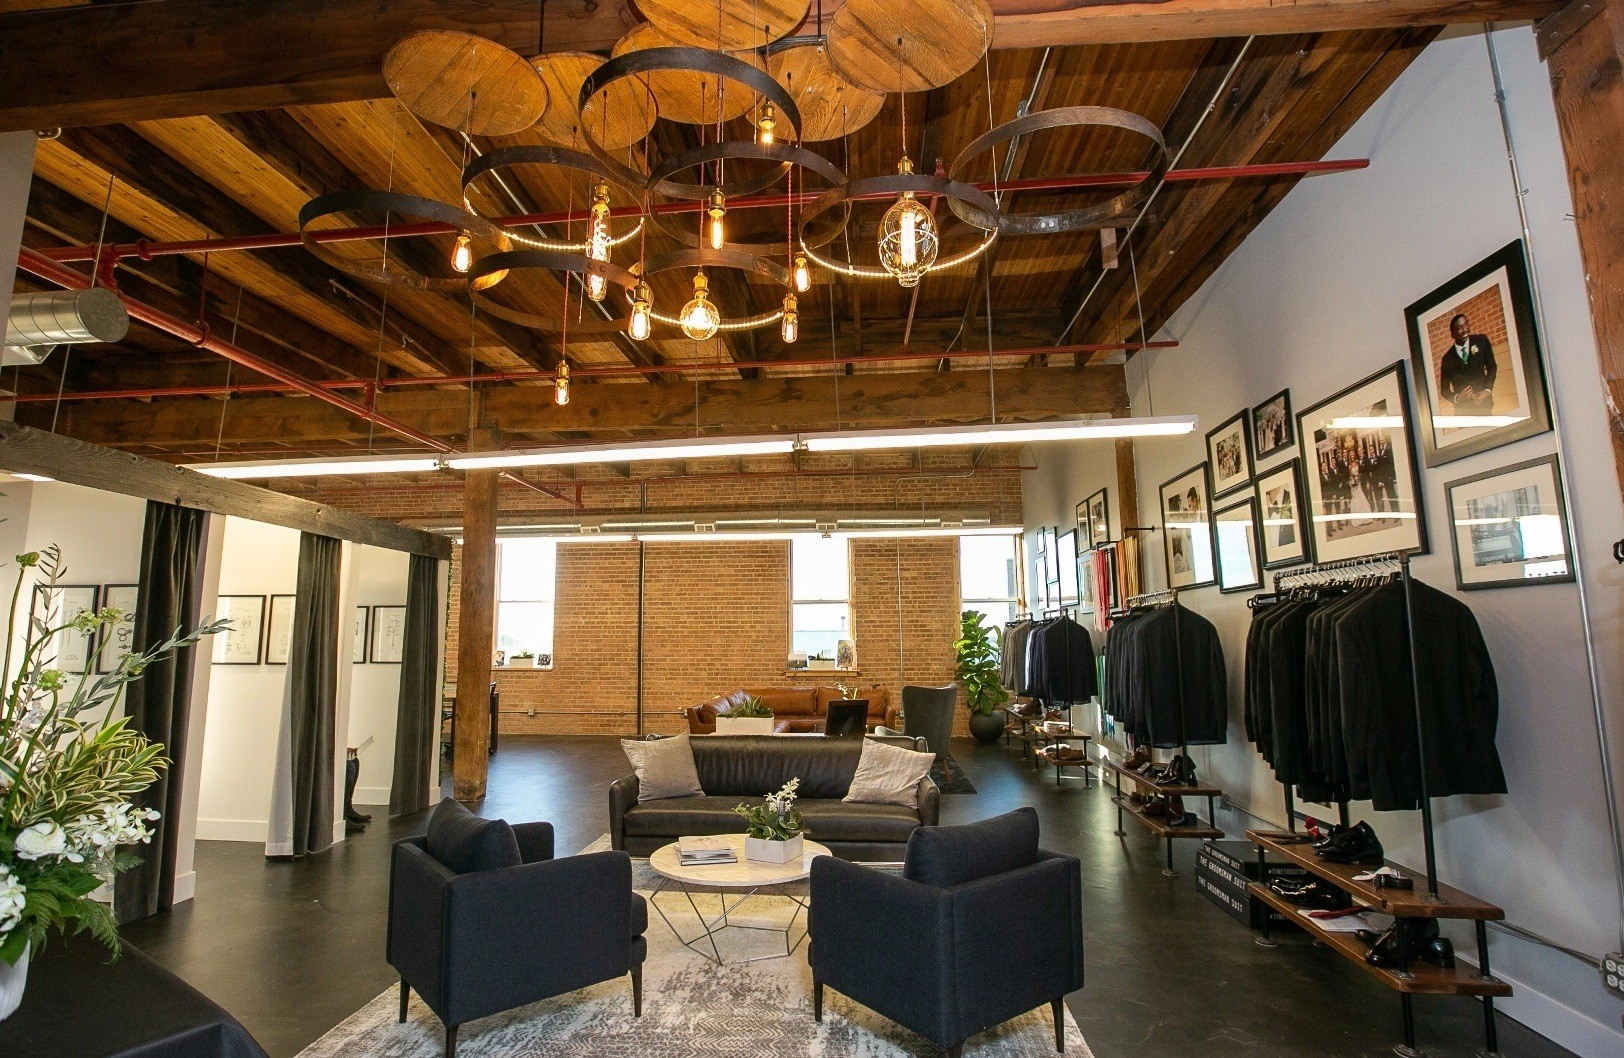 Industrial chic ceiling installation in showroom for SuitShop to get fitted for a suit in Denver.